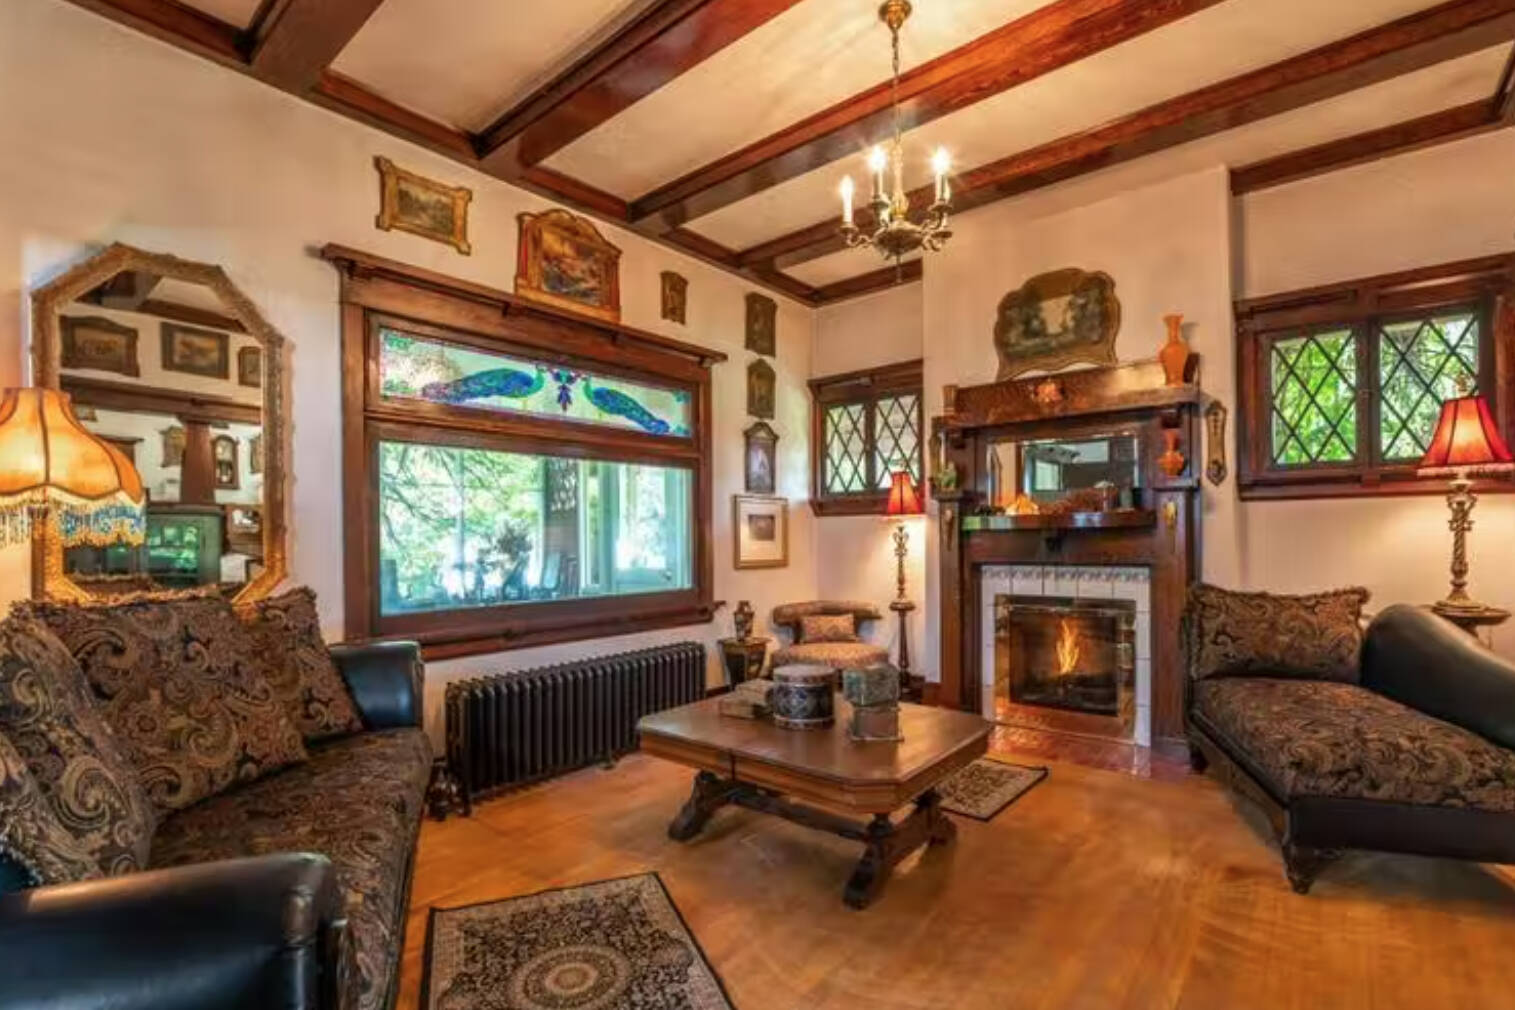 This is one of the sitting room areas of the Riordan House up for sale. Notice the peacocks in the stained glass windows. (Remax photo)